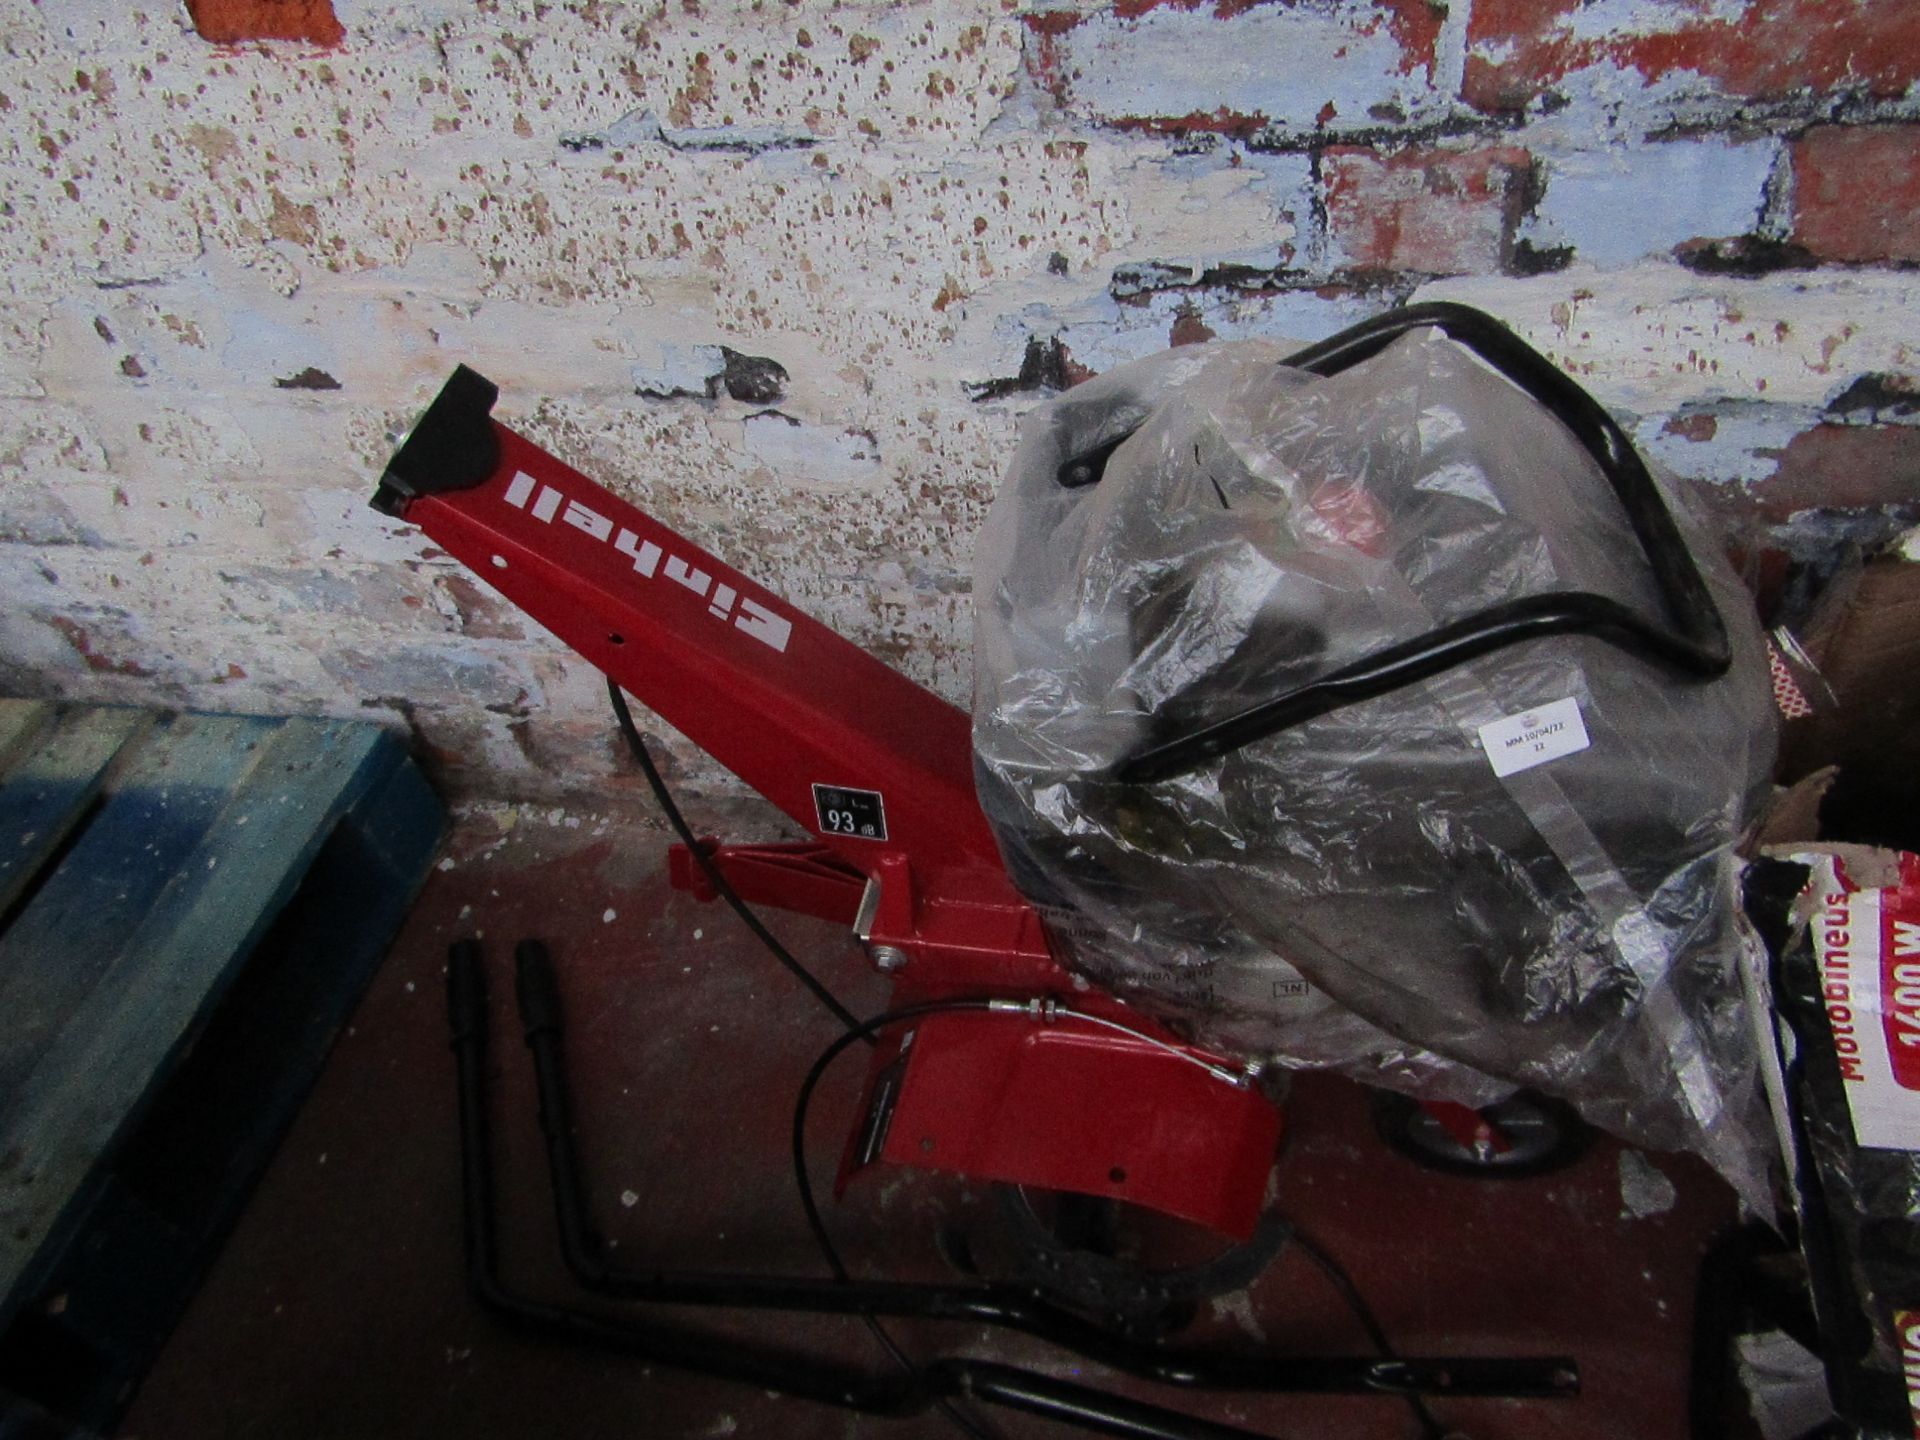 1x Einhell petrol rotovator - Used Condition - Unchecked and Untested this item is a return and